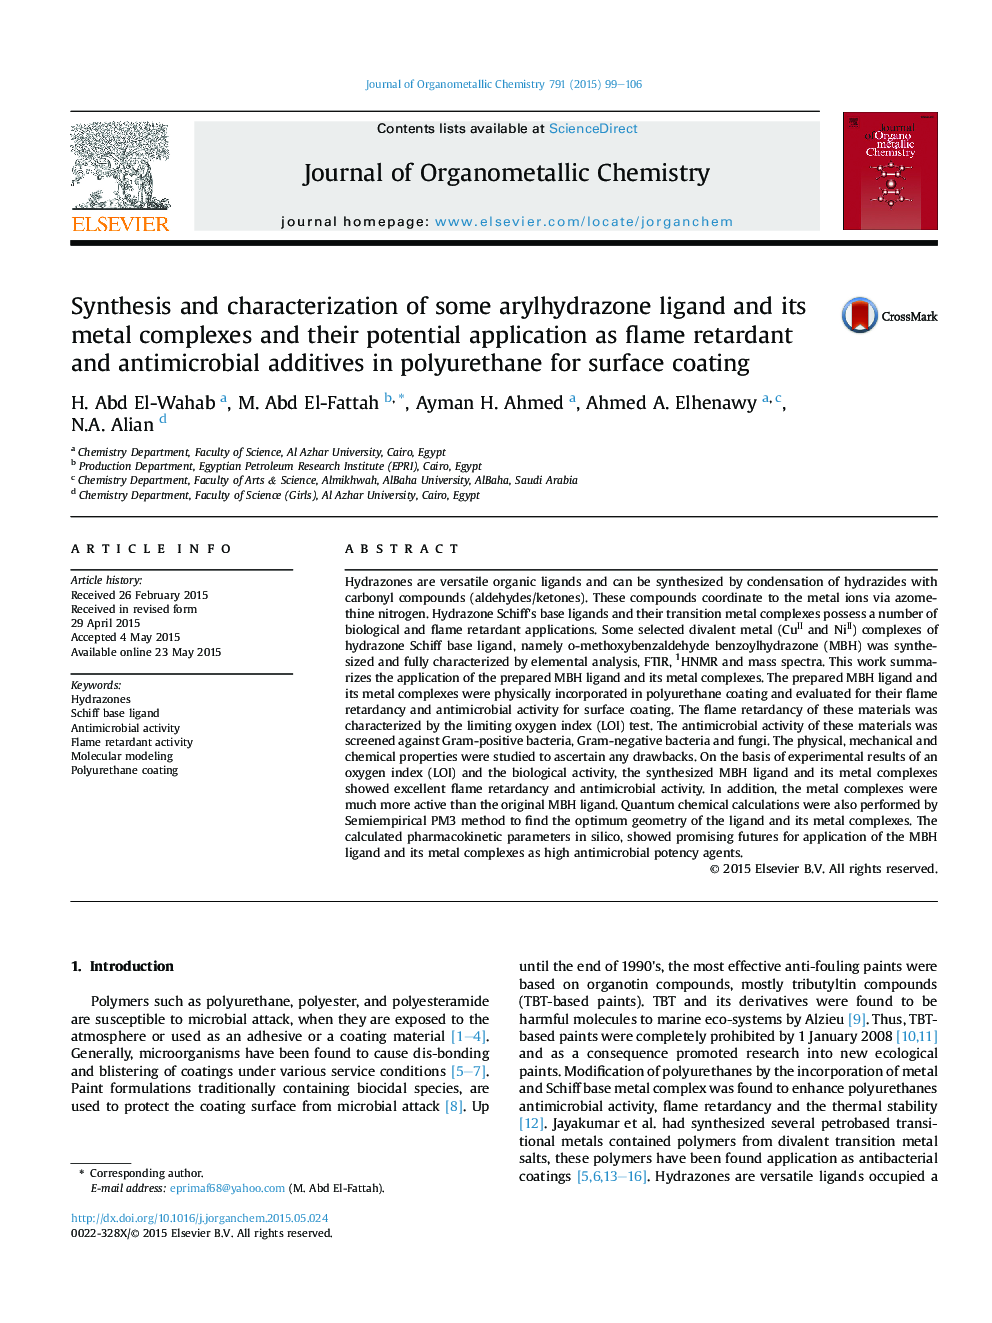 Synthesis and characterization of some arylhydrazone ligand and its metal complexes and their potential application as flame retardant and antimicrobial additives in polyurethane for surface coating